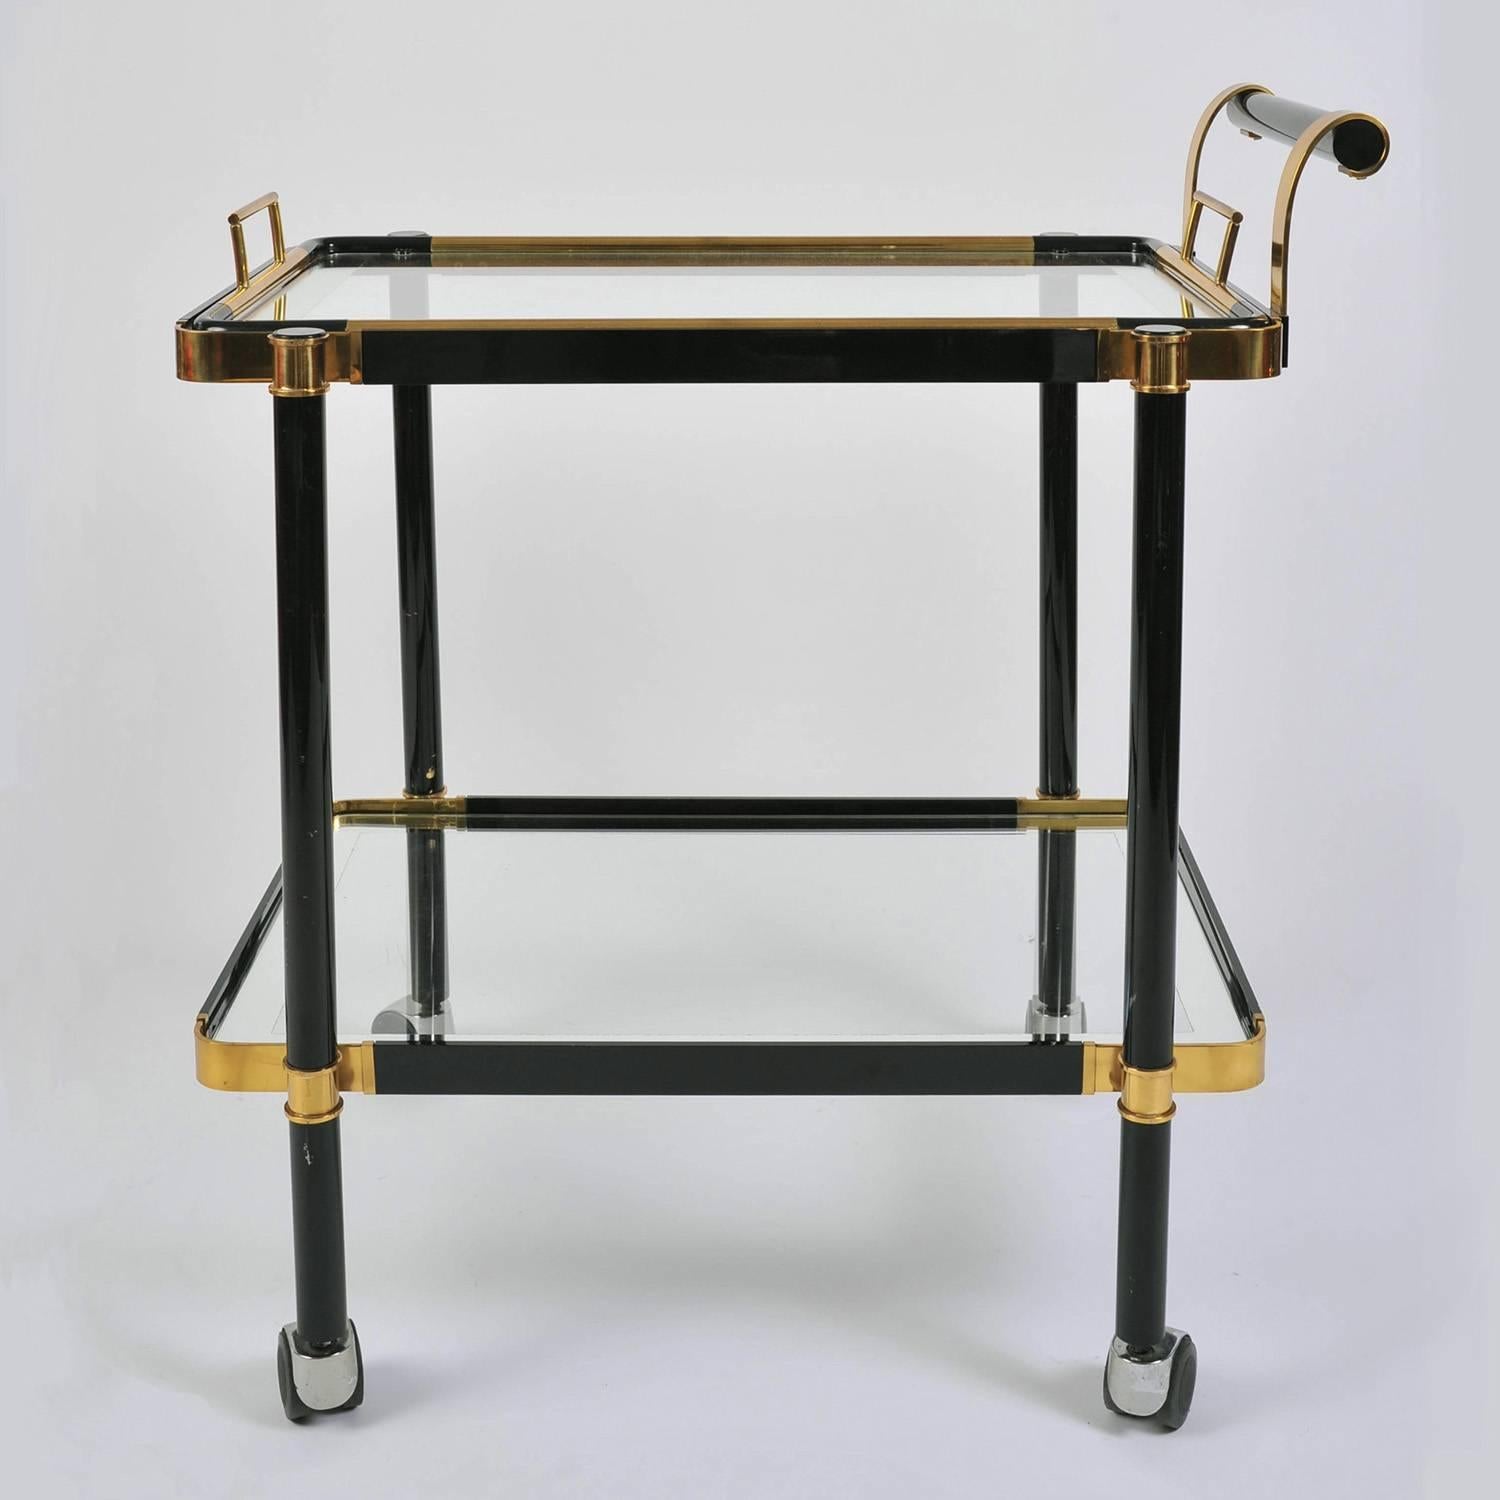 Well-proportioned two-tier black metal and brass drinks trolley. Each glass shelf is framed with mirrored glass. The top shelf doubles as a detachable tray for handing around the drinks. Caster wheels make it easy to manoeuvre.